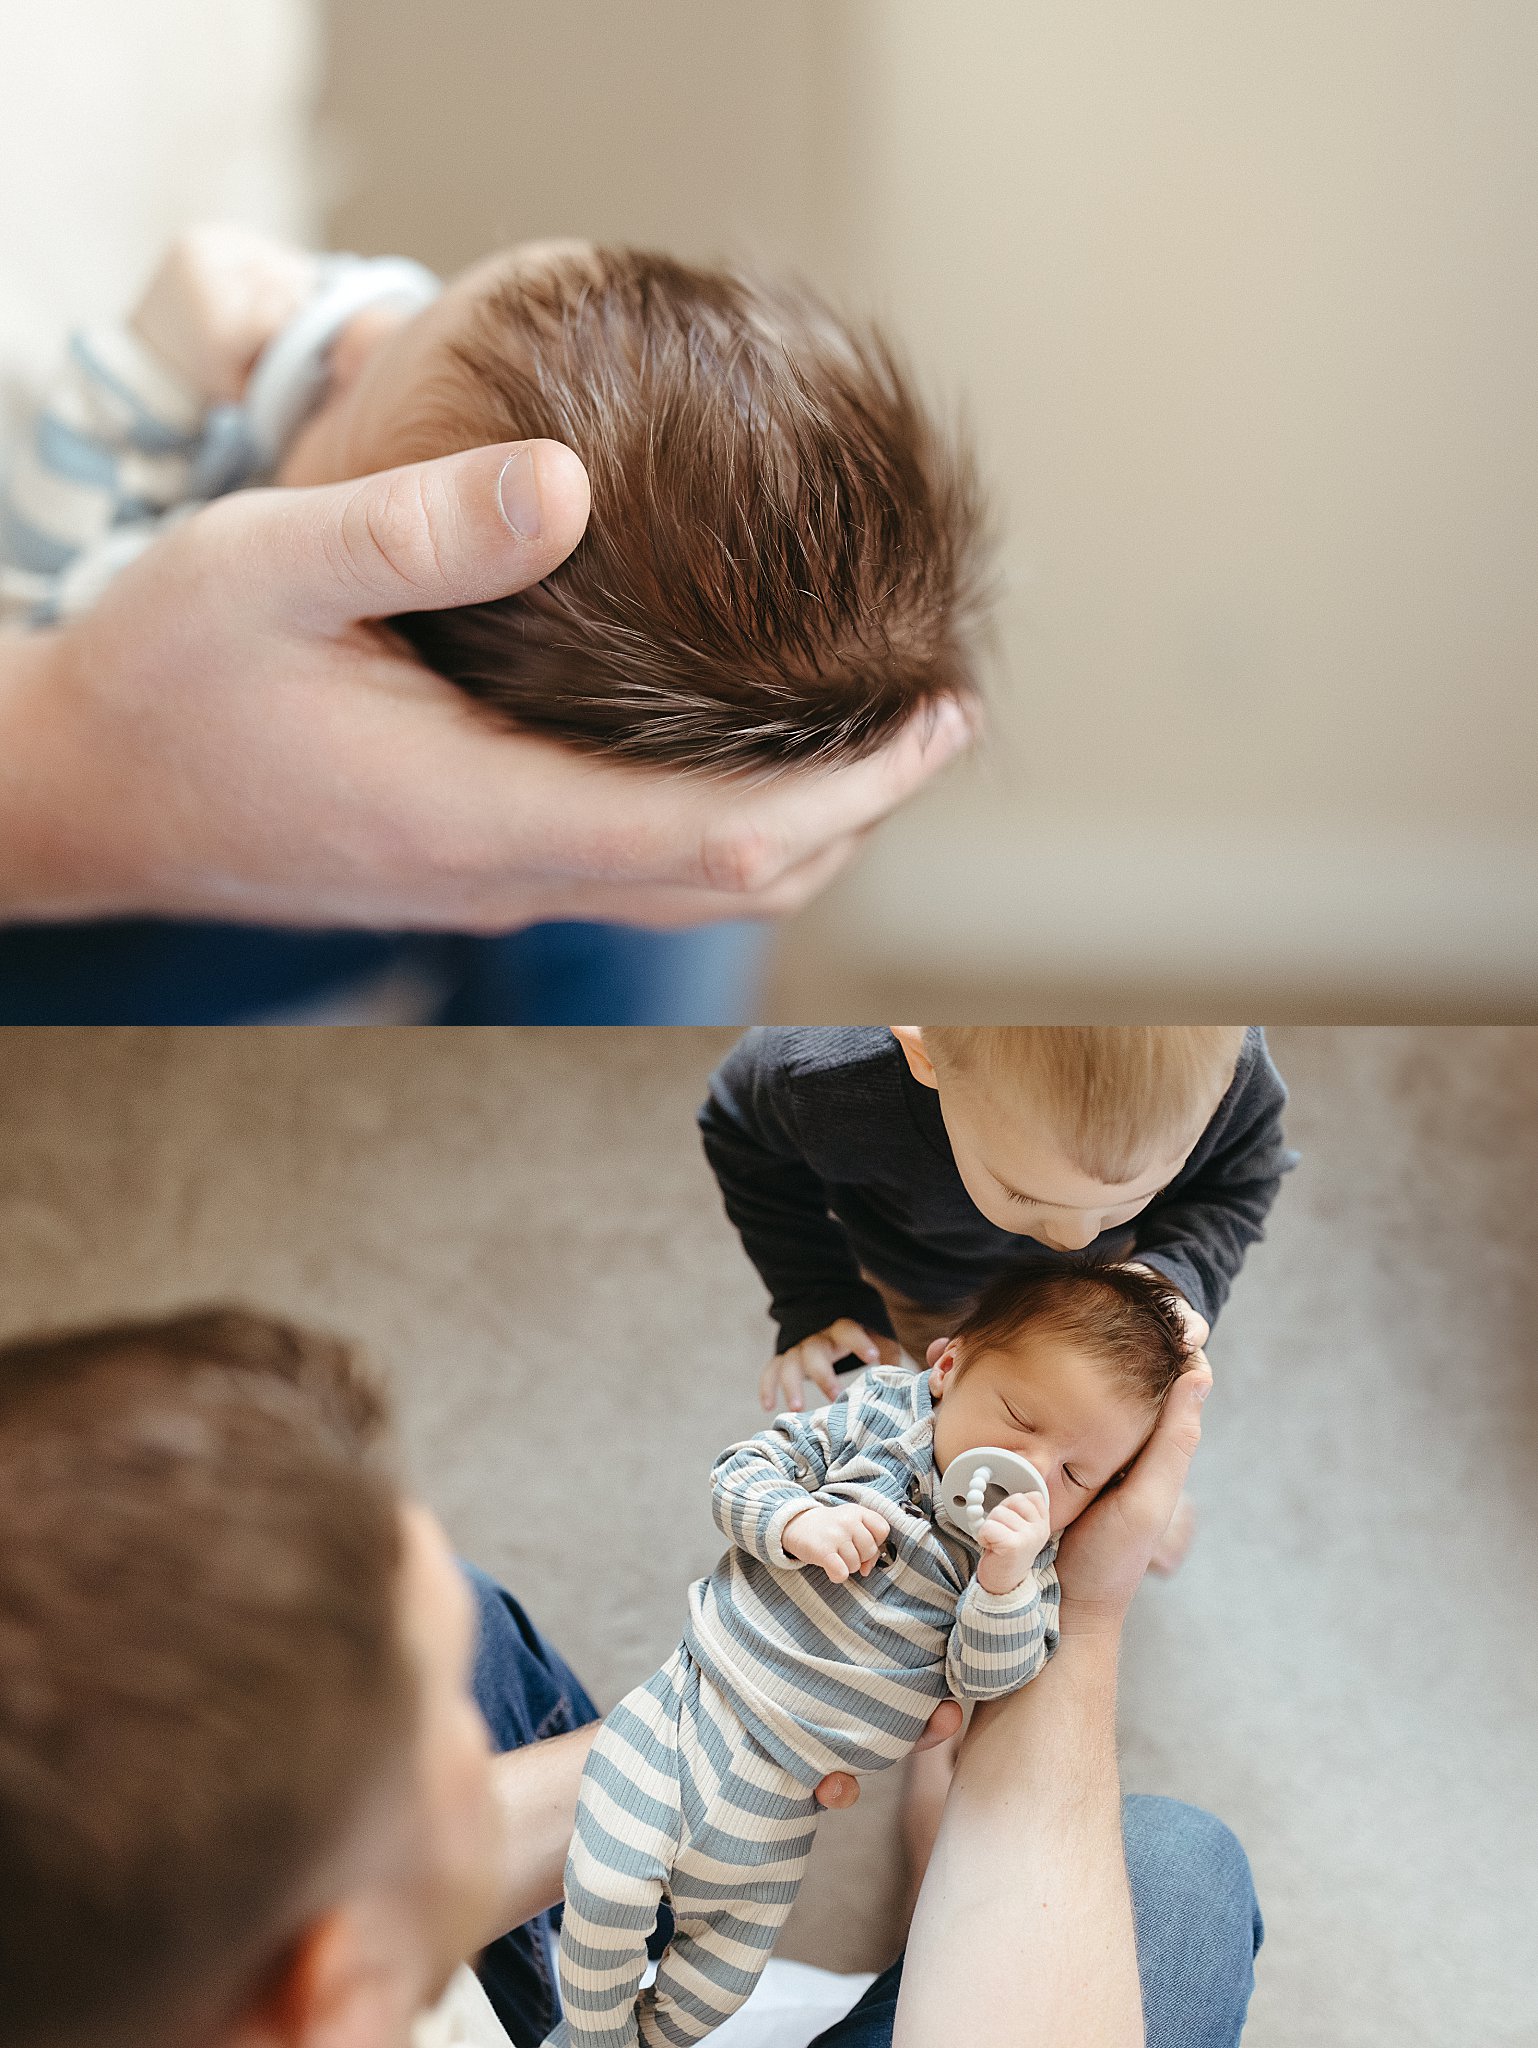 brother leans in to kiss new baby during in-home newborn session with siblings